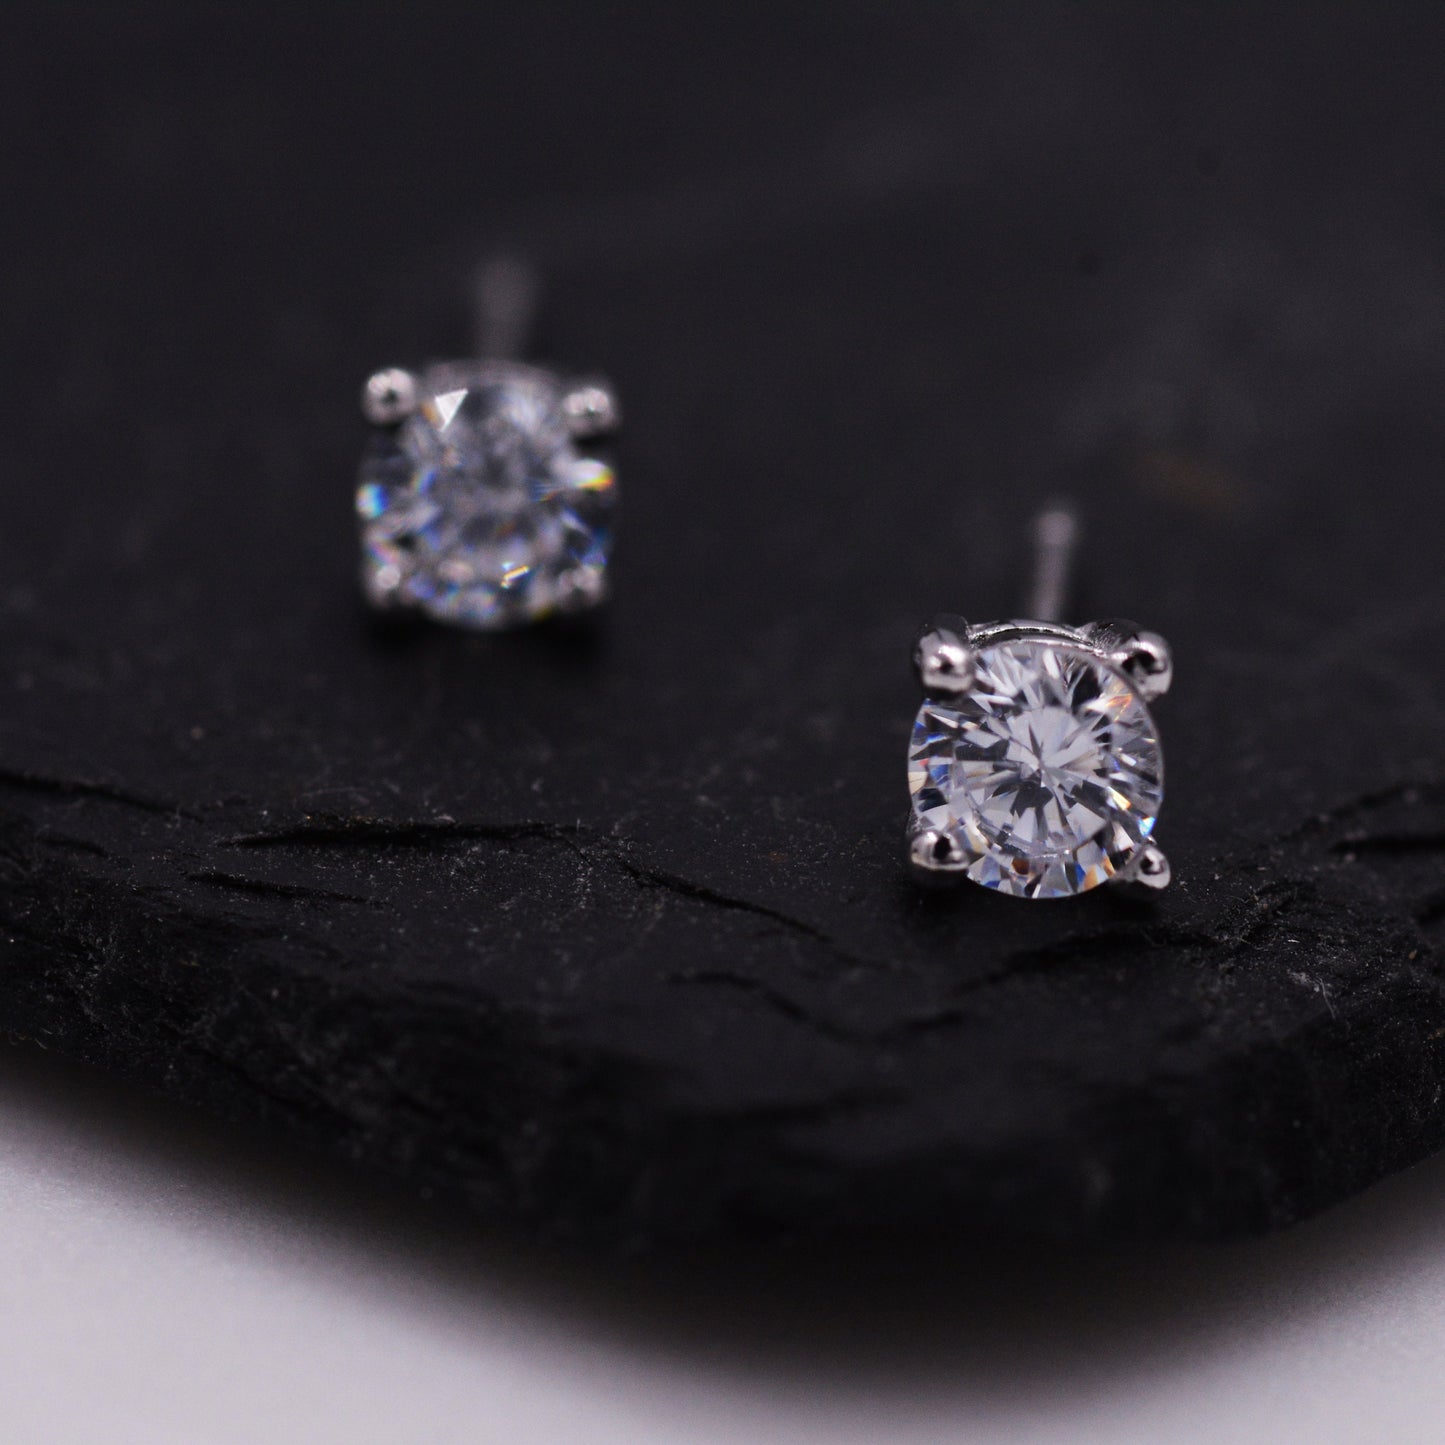 Sterling Silver Tiny Little Stud Earrings, Barely Visible, Extra Small CZ Stud, Stacking Earrings, Cubic Zirconia Crystal